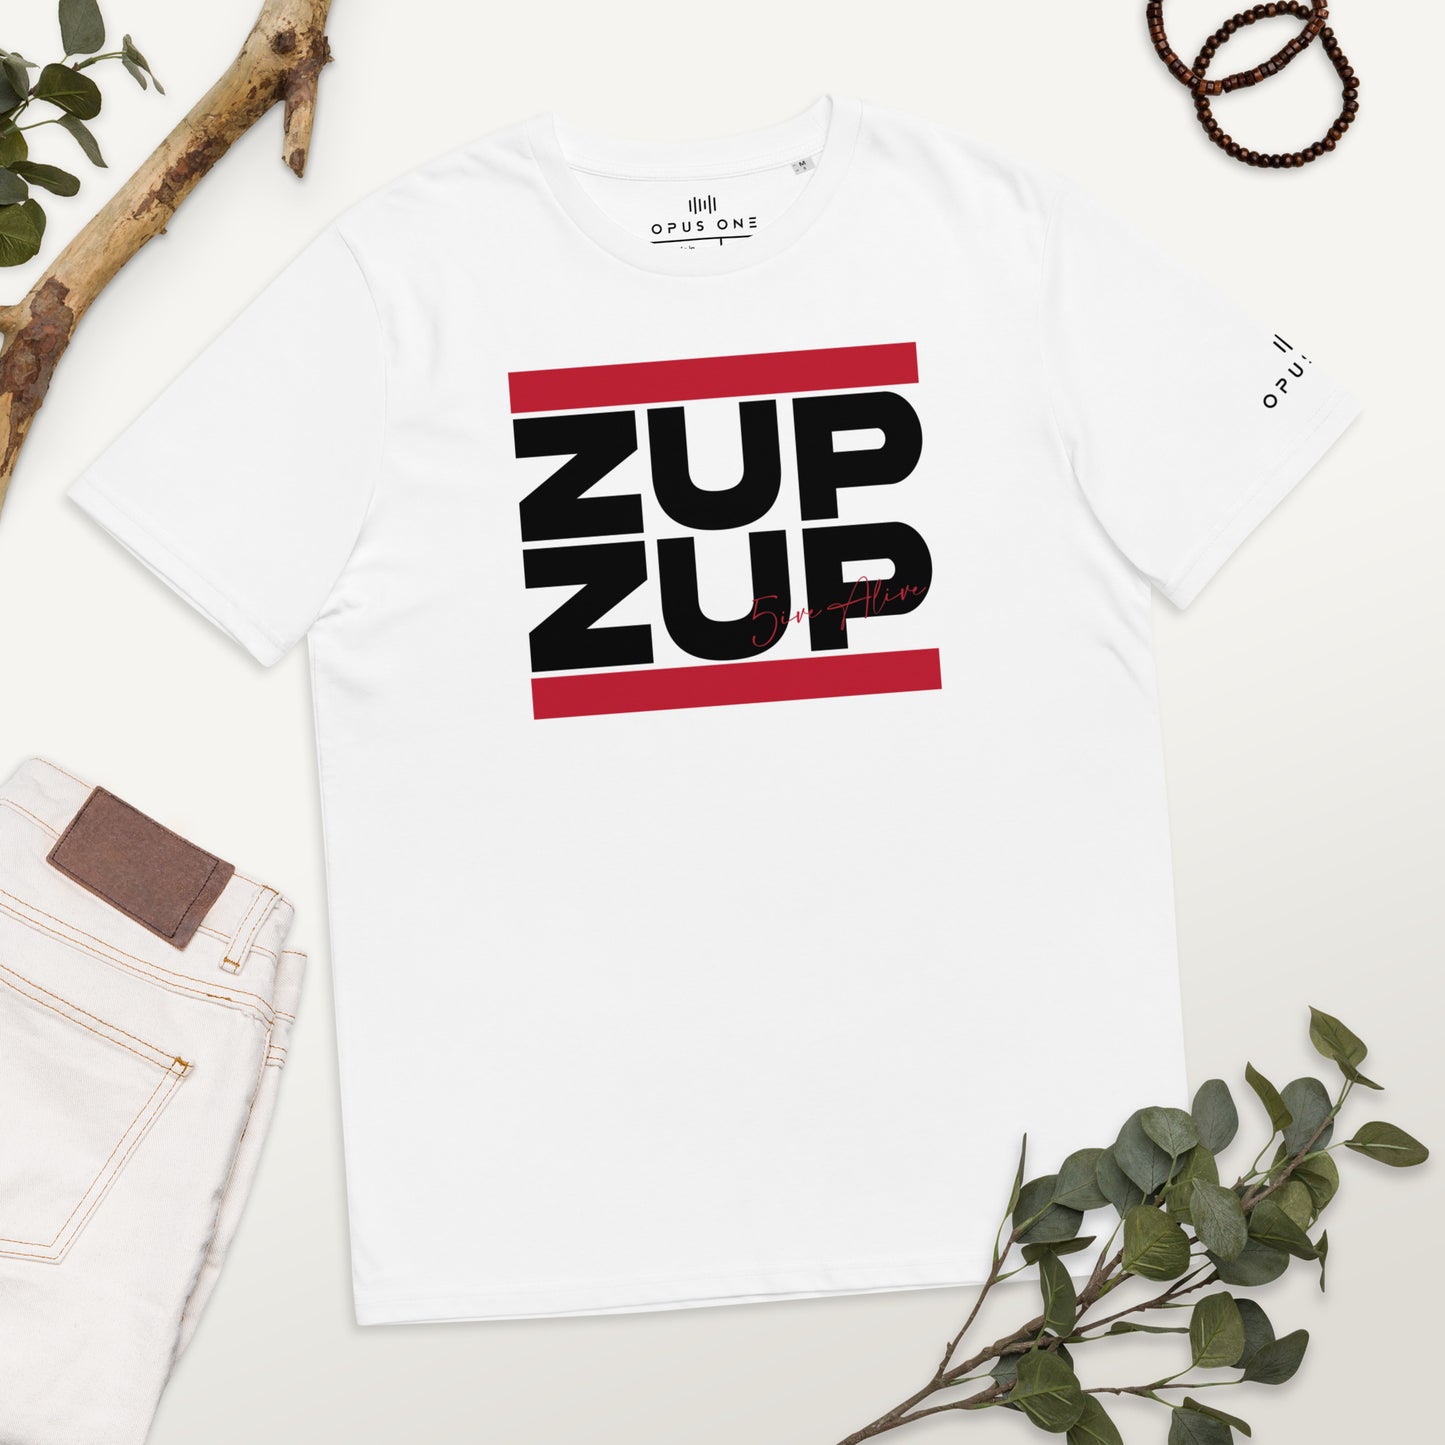 Signature Series (MC 5ive Alive 'Zup Zup') Unisex organic cotton t-shirt (Black Text) MAIN FRONT PRINT